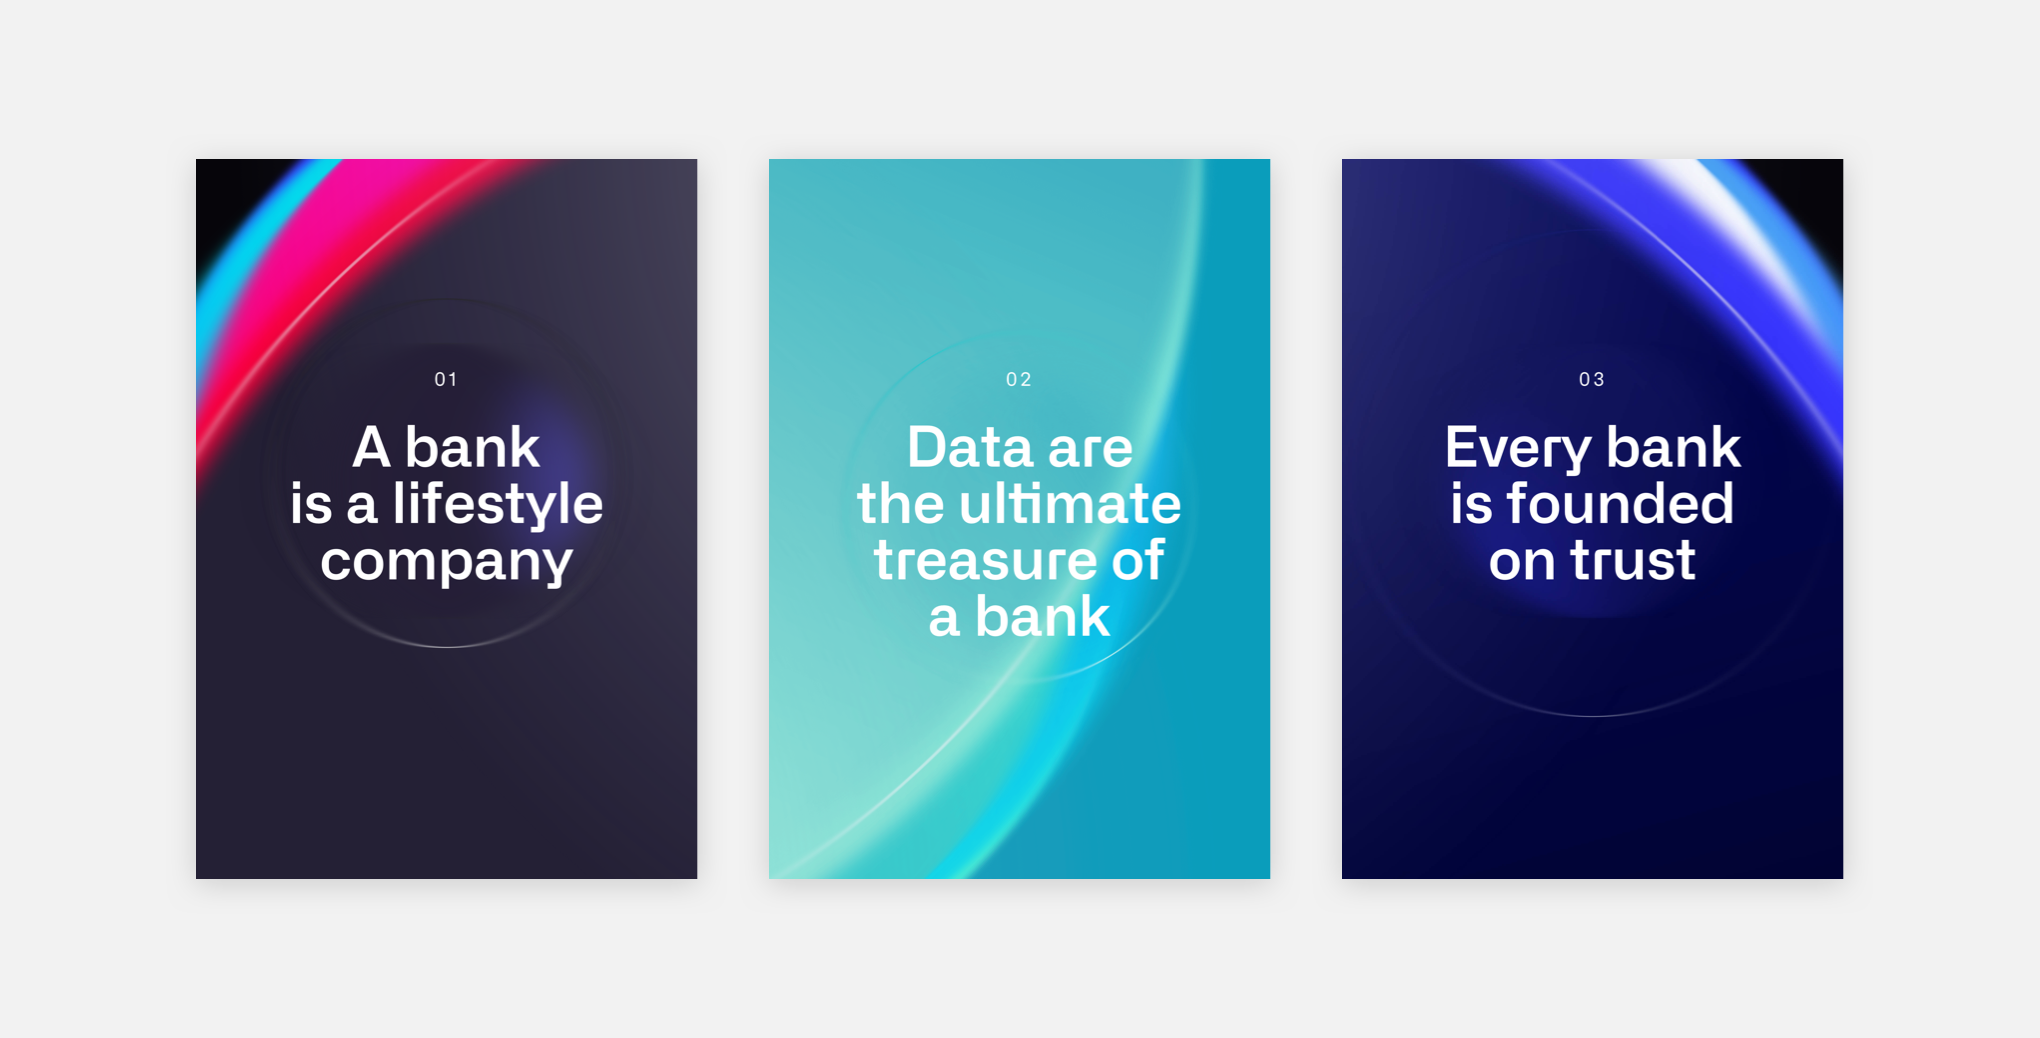 Three design pillars that will shape the future of the banking sector